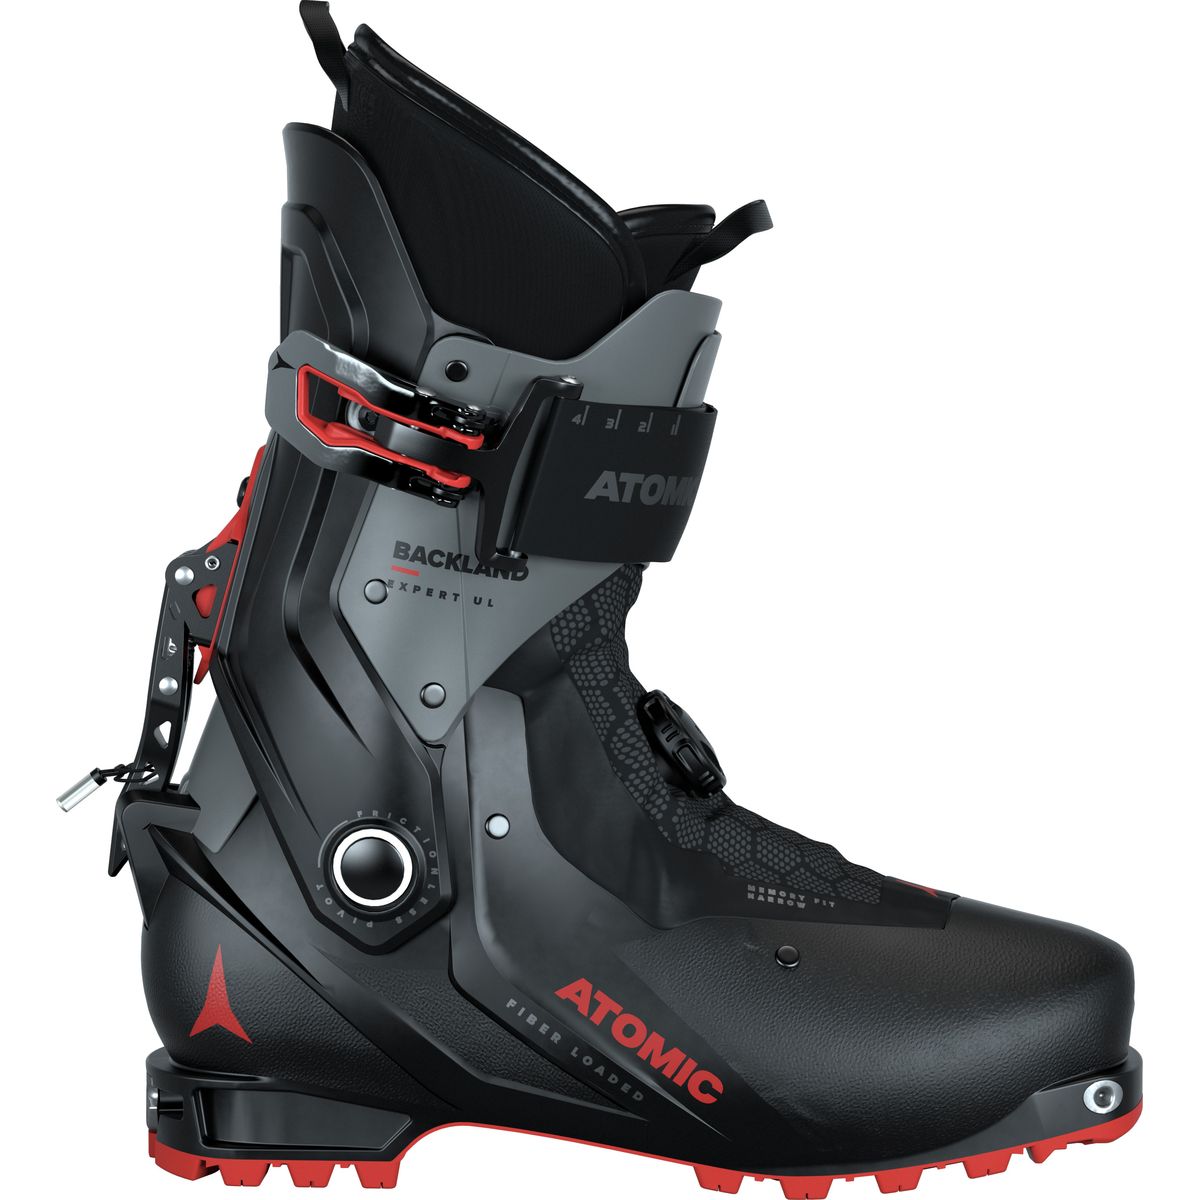 Atomic Backland Expert UL Skistiefel